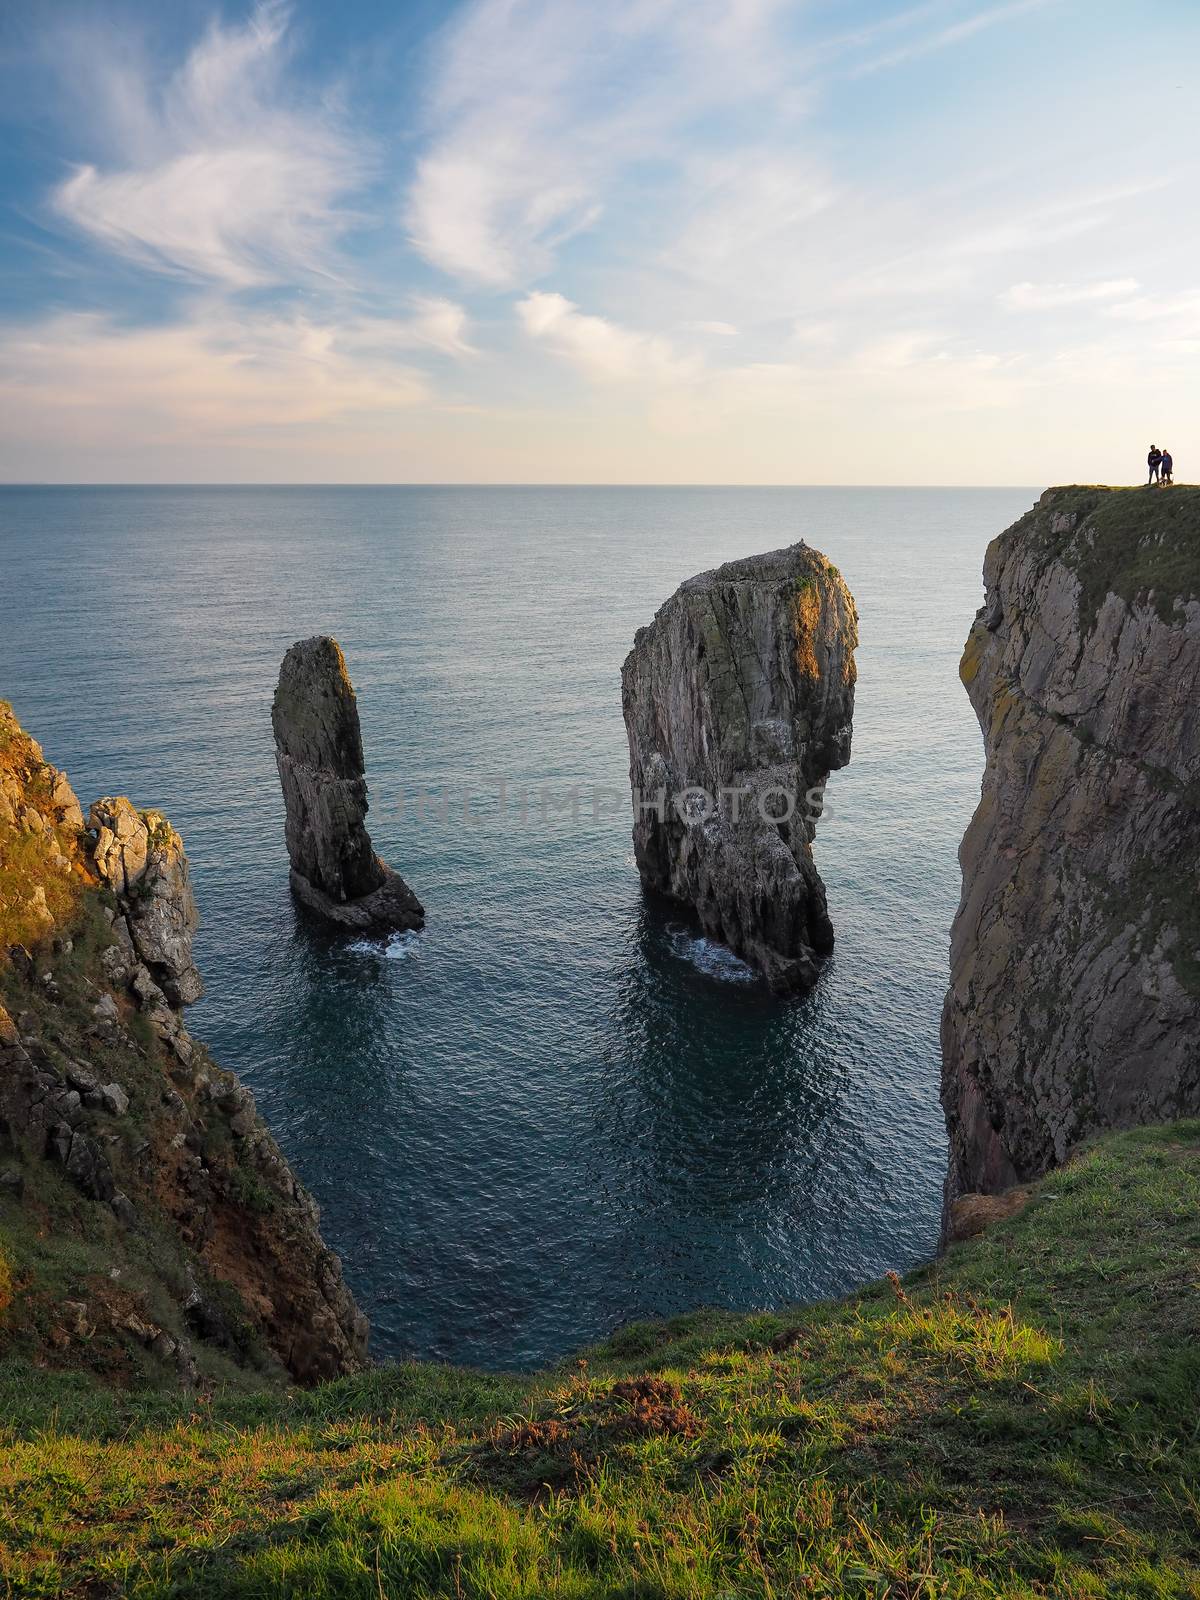 Elegug Stacks, two prominent limestone sea stacks rise up from the sea close to the cliffs, with two people looking down over them, south coast of Pembrokeshire, Wales, UK